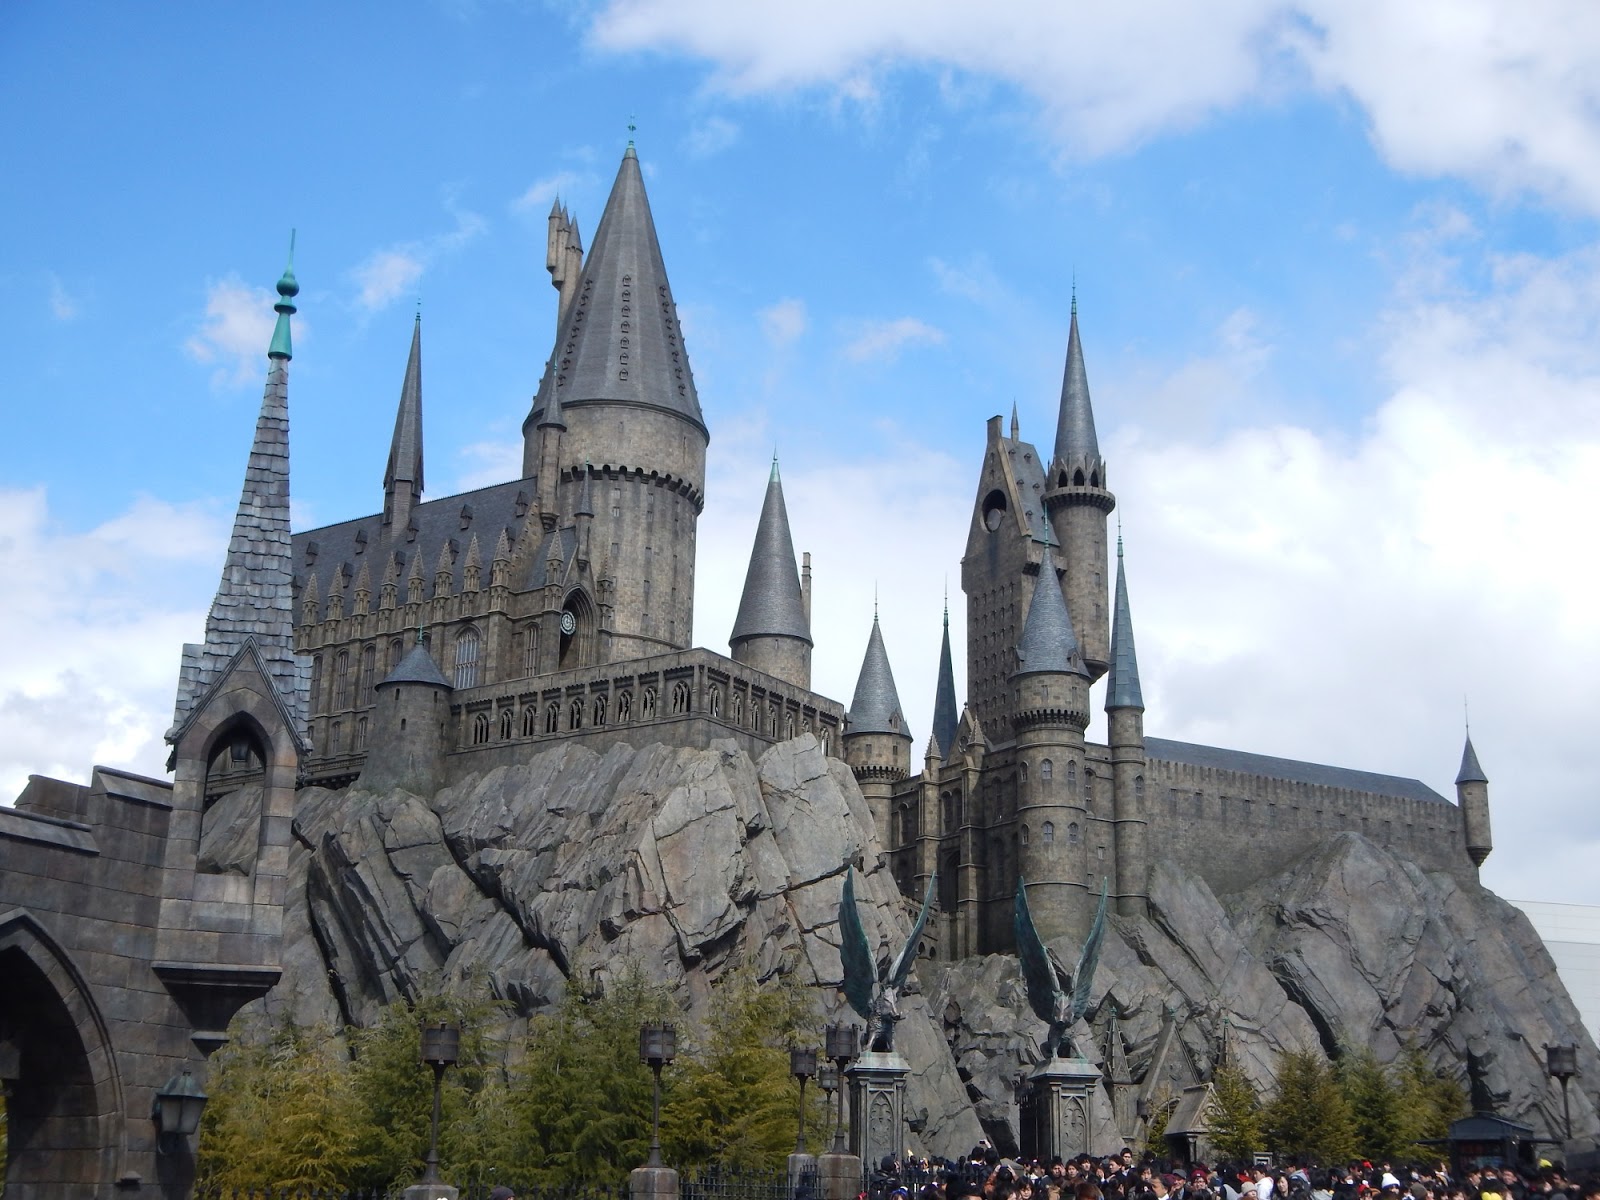 A magical day in Universal Studios Japan (USJ)